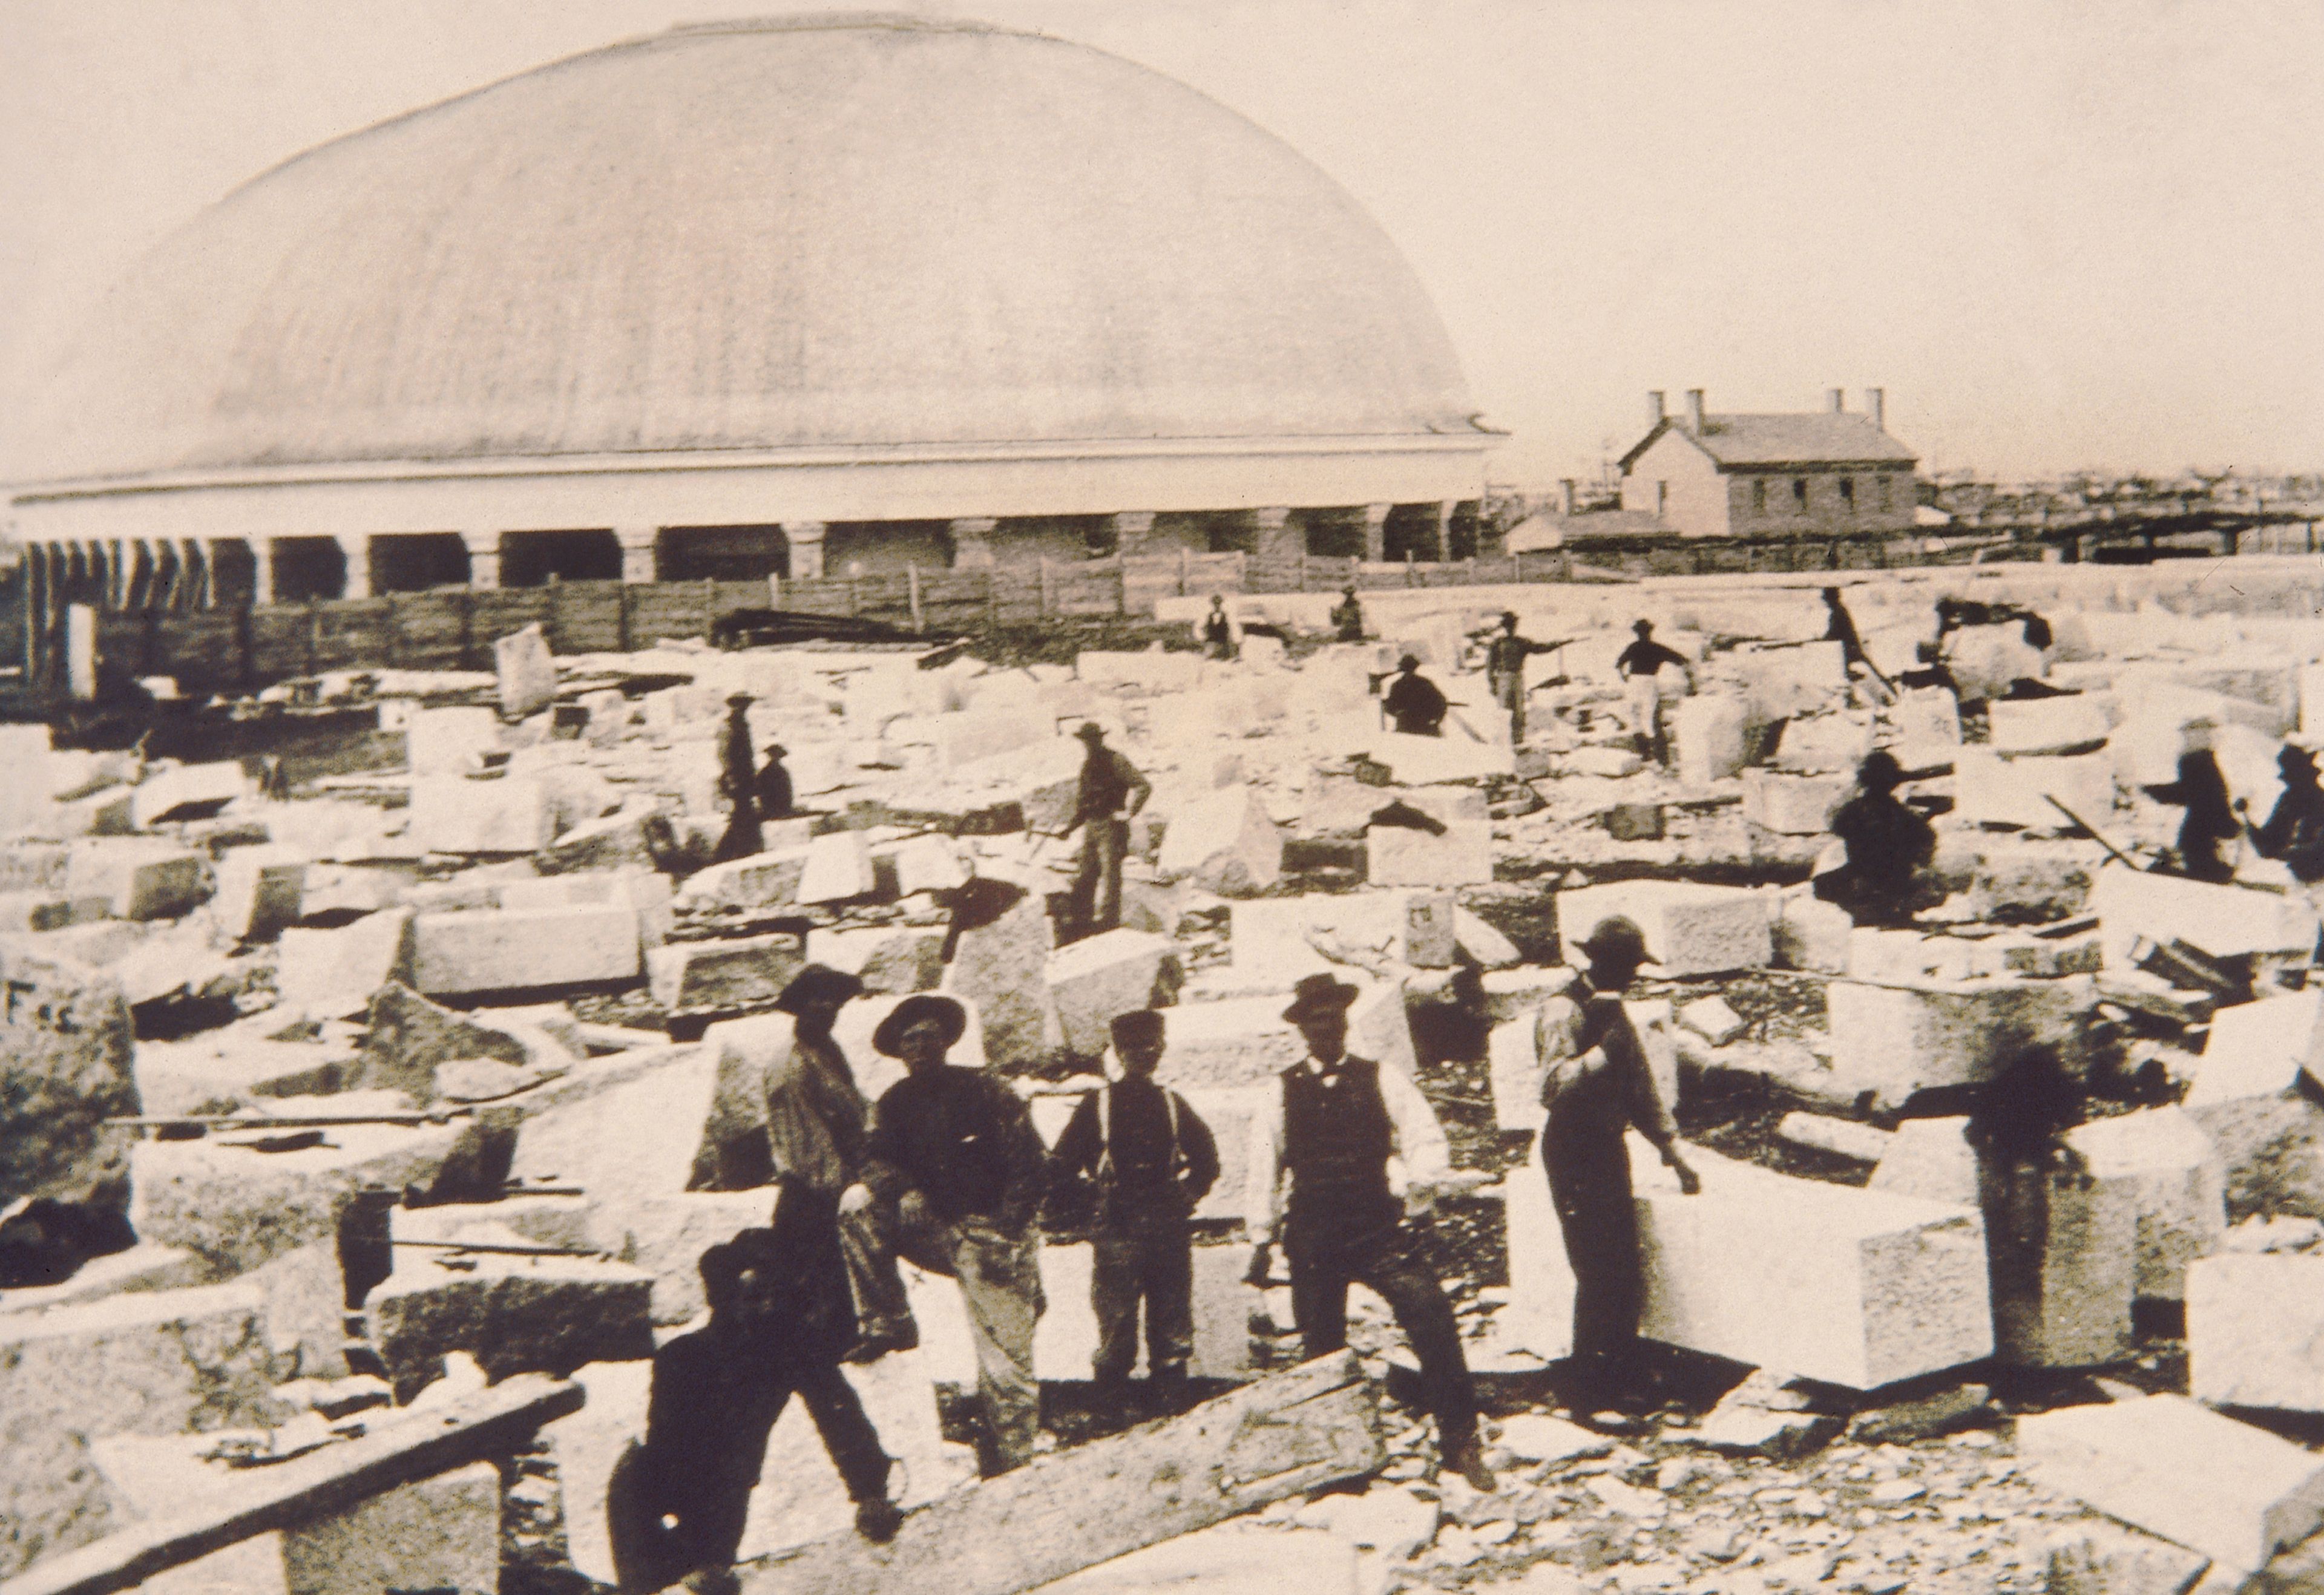 A historical photograph showing workmen using large granite bricks to begin construction on the Salt Lake Temple.